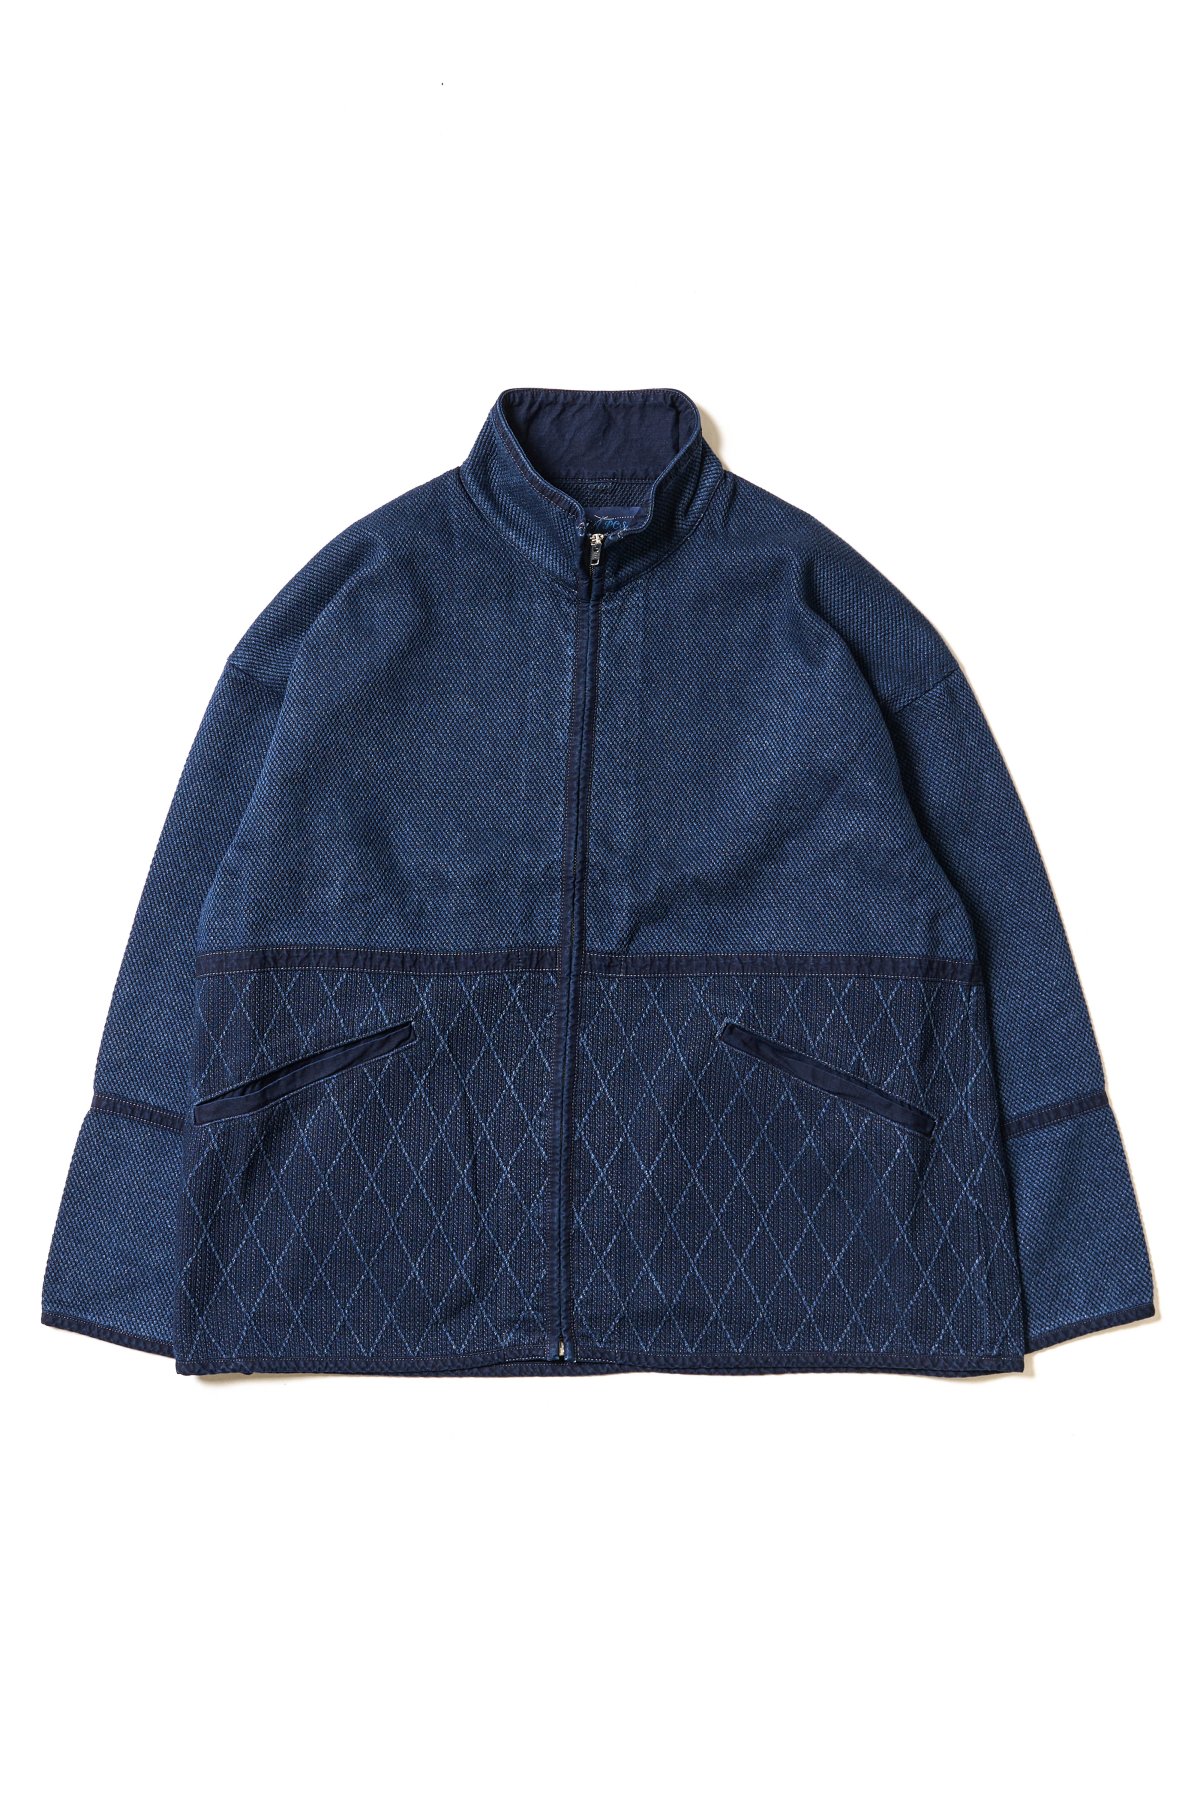 Porter Classic KENDO ポータークラシック ケンドー 通販 正規店 フェートン - Phaeton Smart Clothes  Online Store